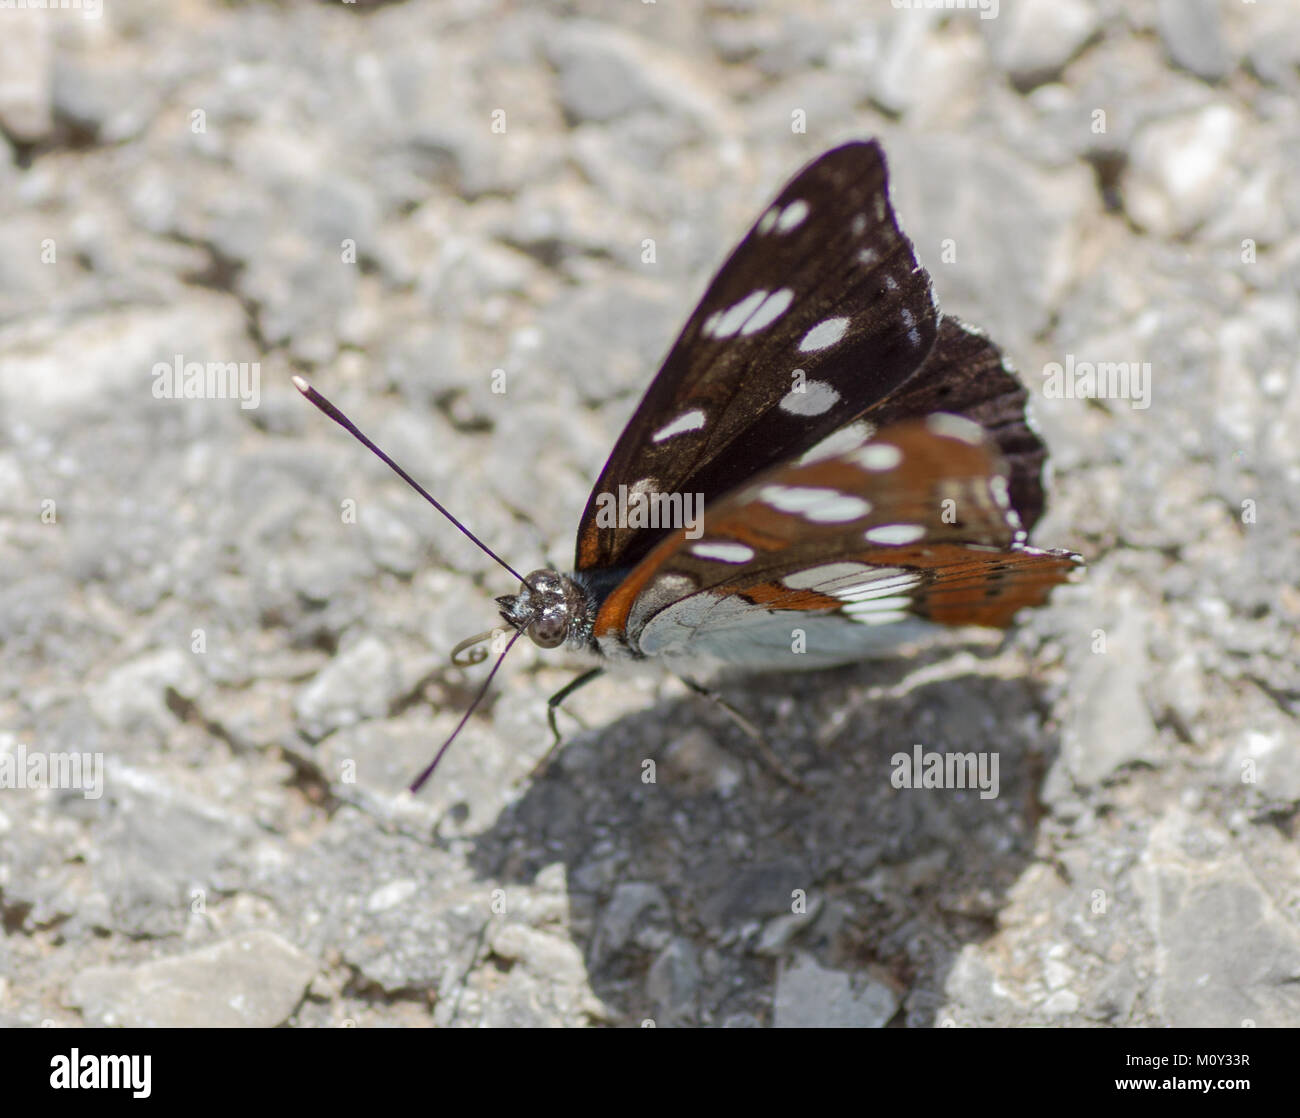 Brown / golden butterfly with white spots resting on a grey rocky surface, Croatia 2017 Stock Photo